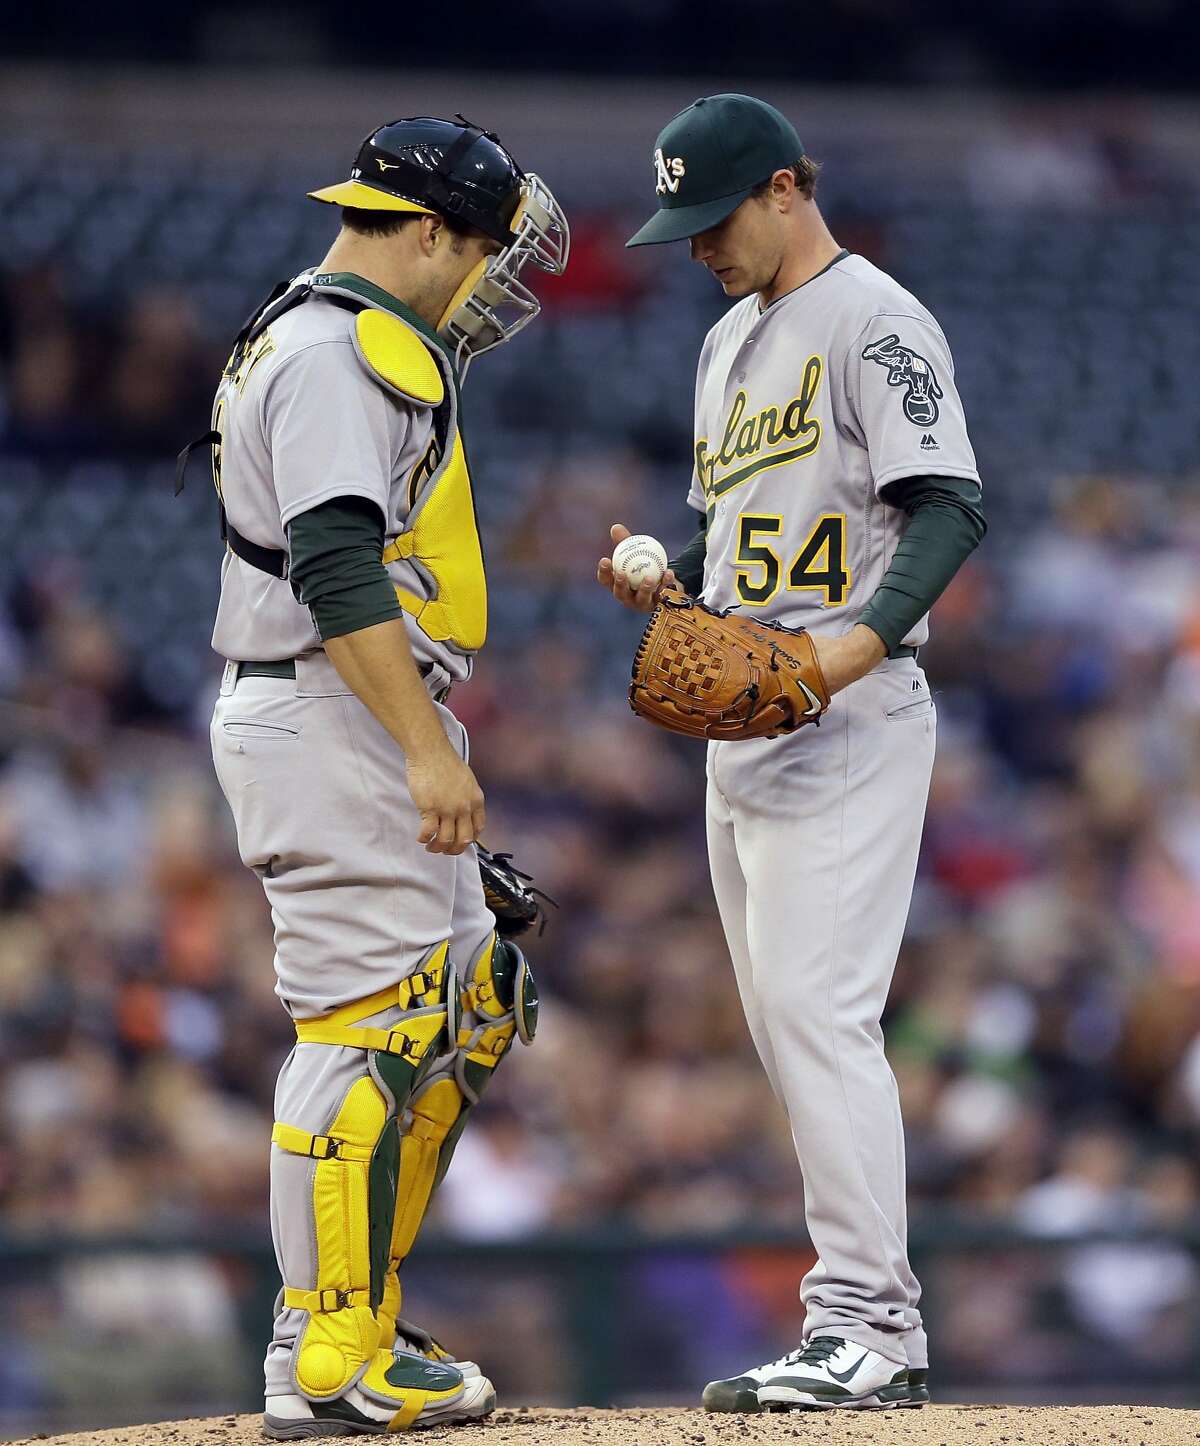 Oakland Athletics catcher Josh Phegley talks with starting pitcher Sonny Gray (54) on the mound during the second inning of a baseball game against the Detroit Tigers, Wednesday, April 27, 2016, in Detroit. (AP Photo/Carlos Osorio)